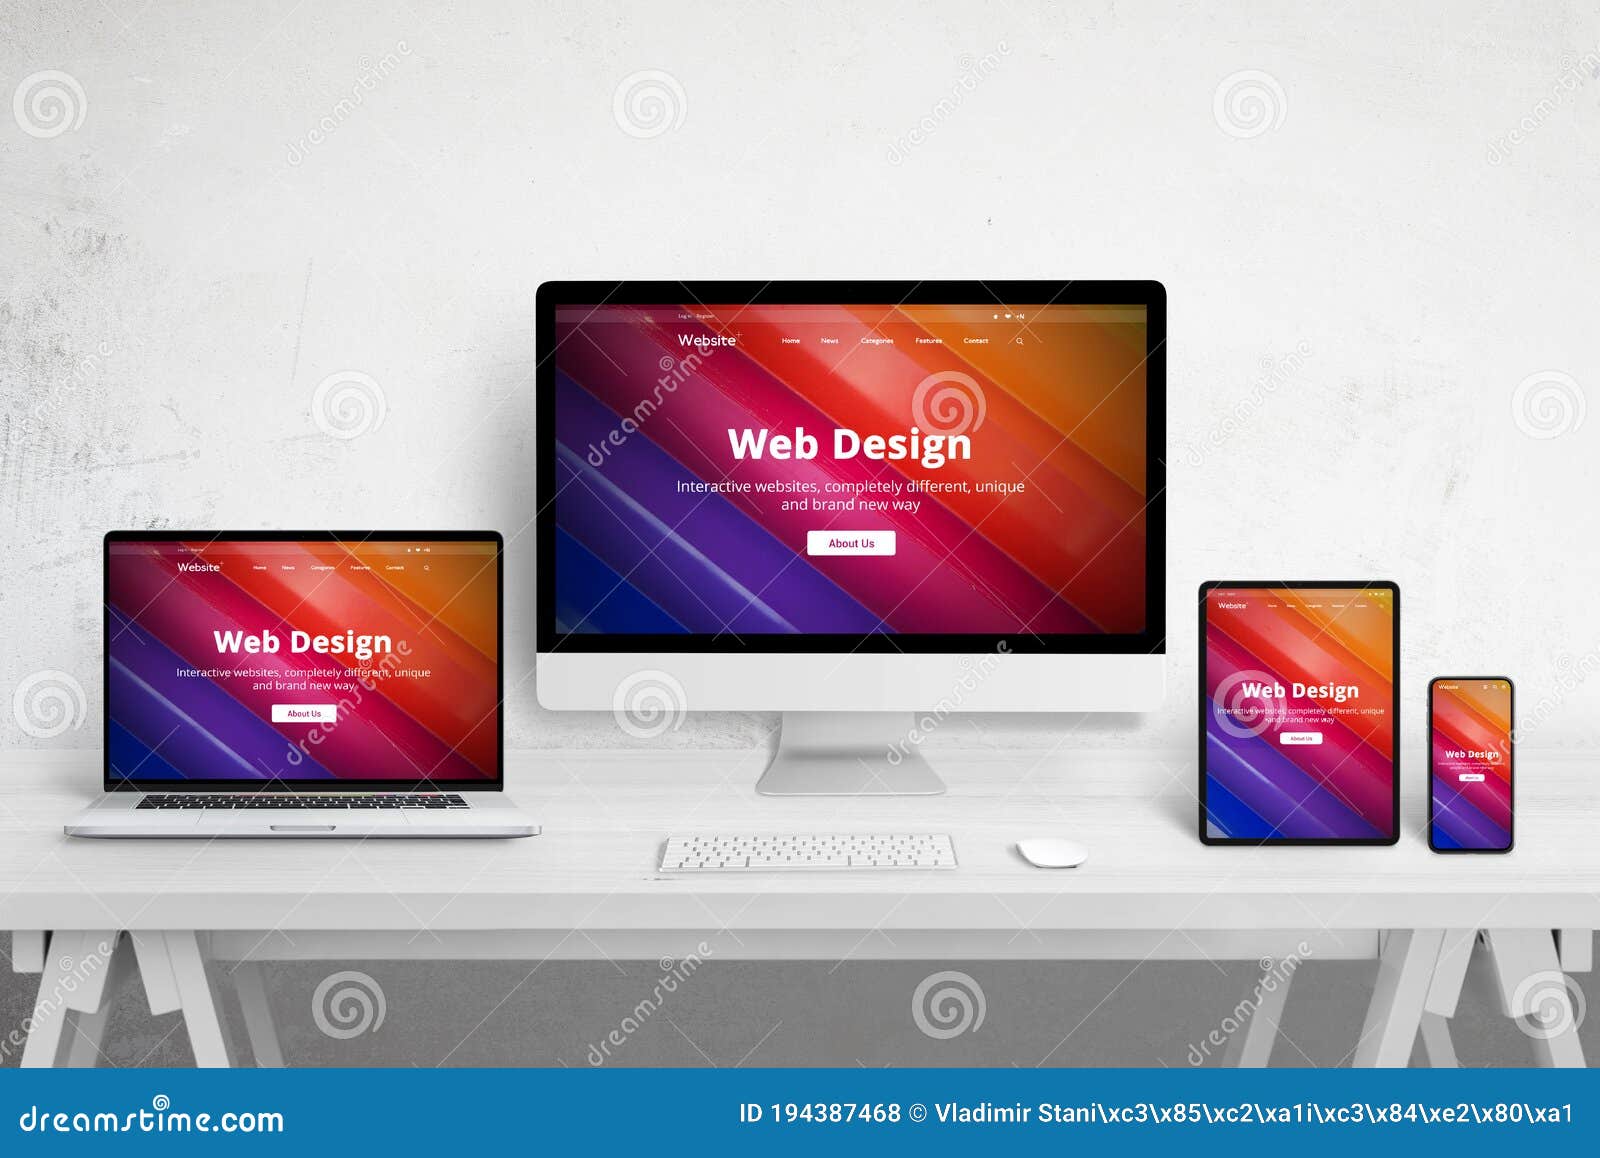 responsive web site  on different devices